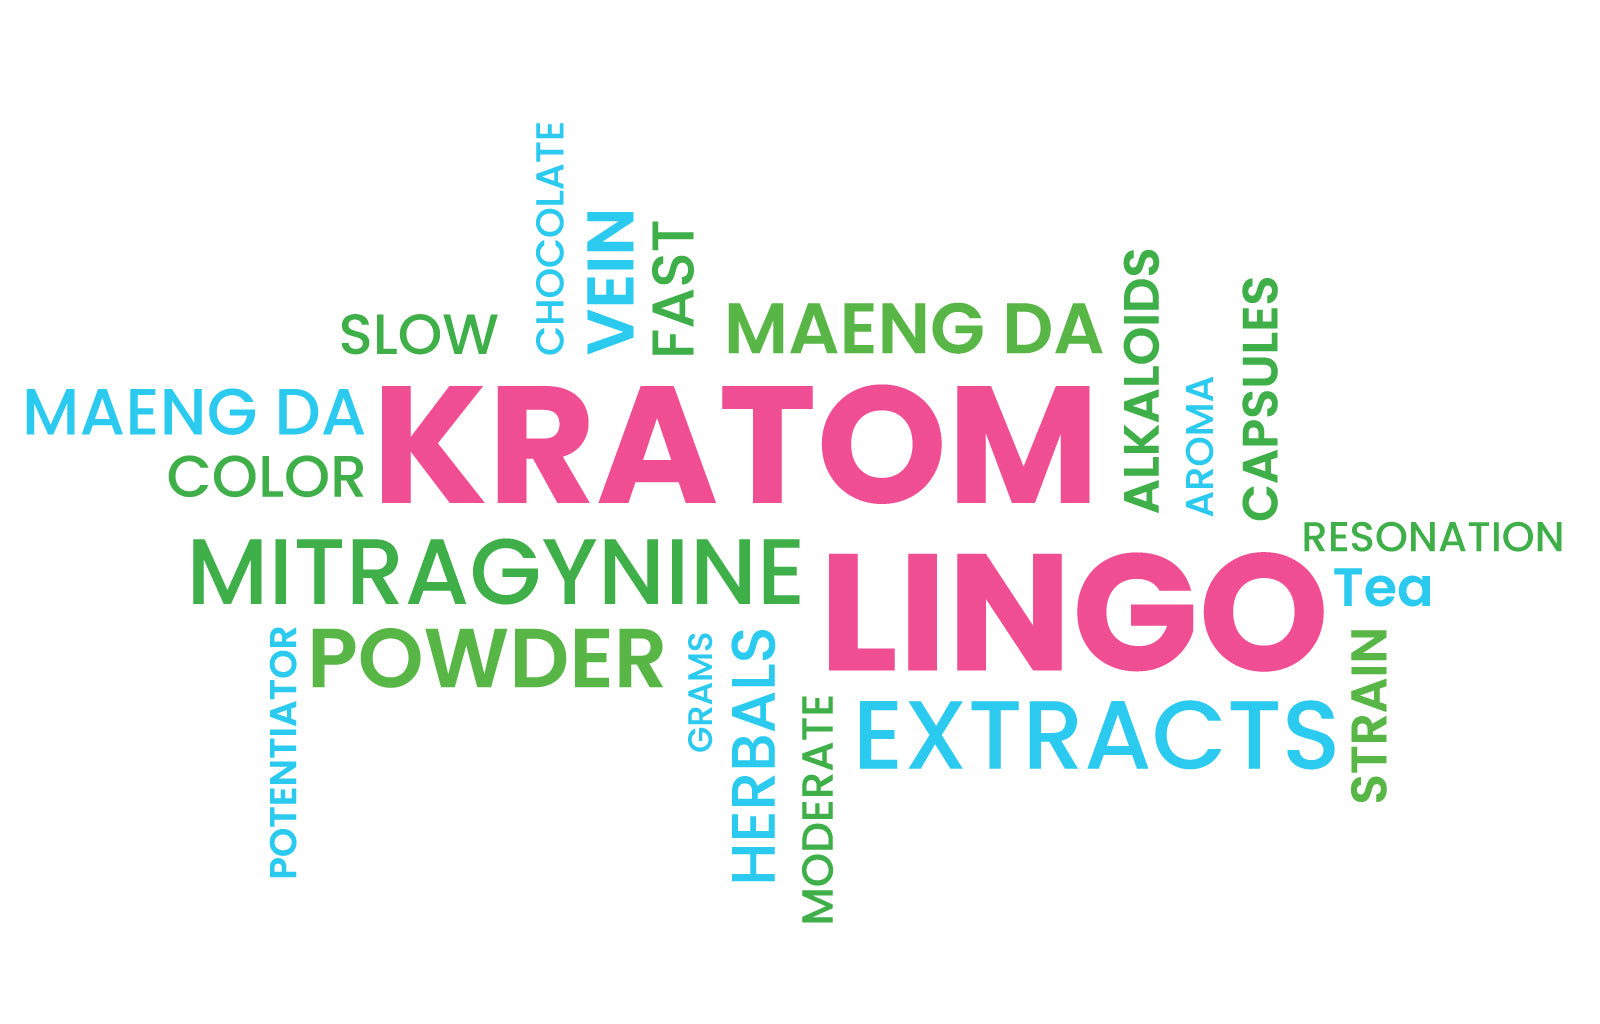 Featured image depicting a word cloud containing numerous Kratom-based keywords in cool colors like blue and green; At the center of the word cloud can be read "Kratom Lingo" in bright pink lettering, indicating the title of the article.